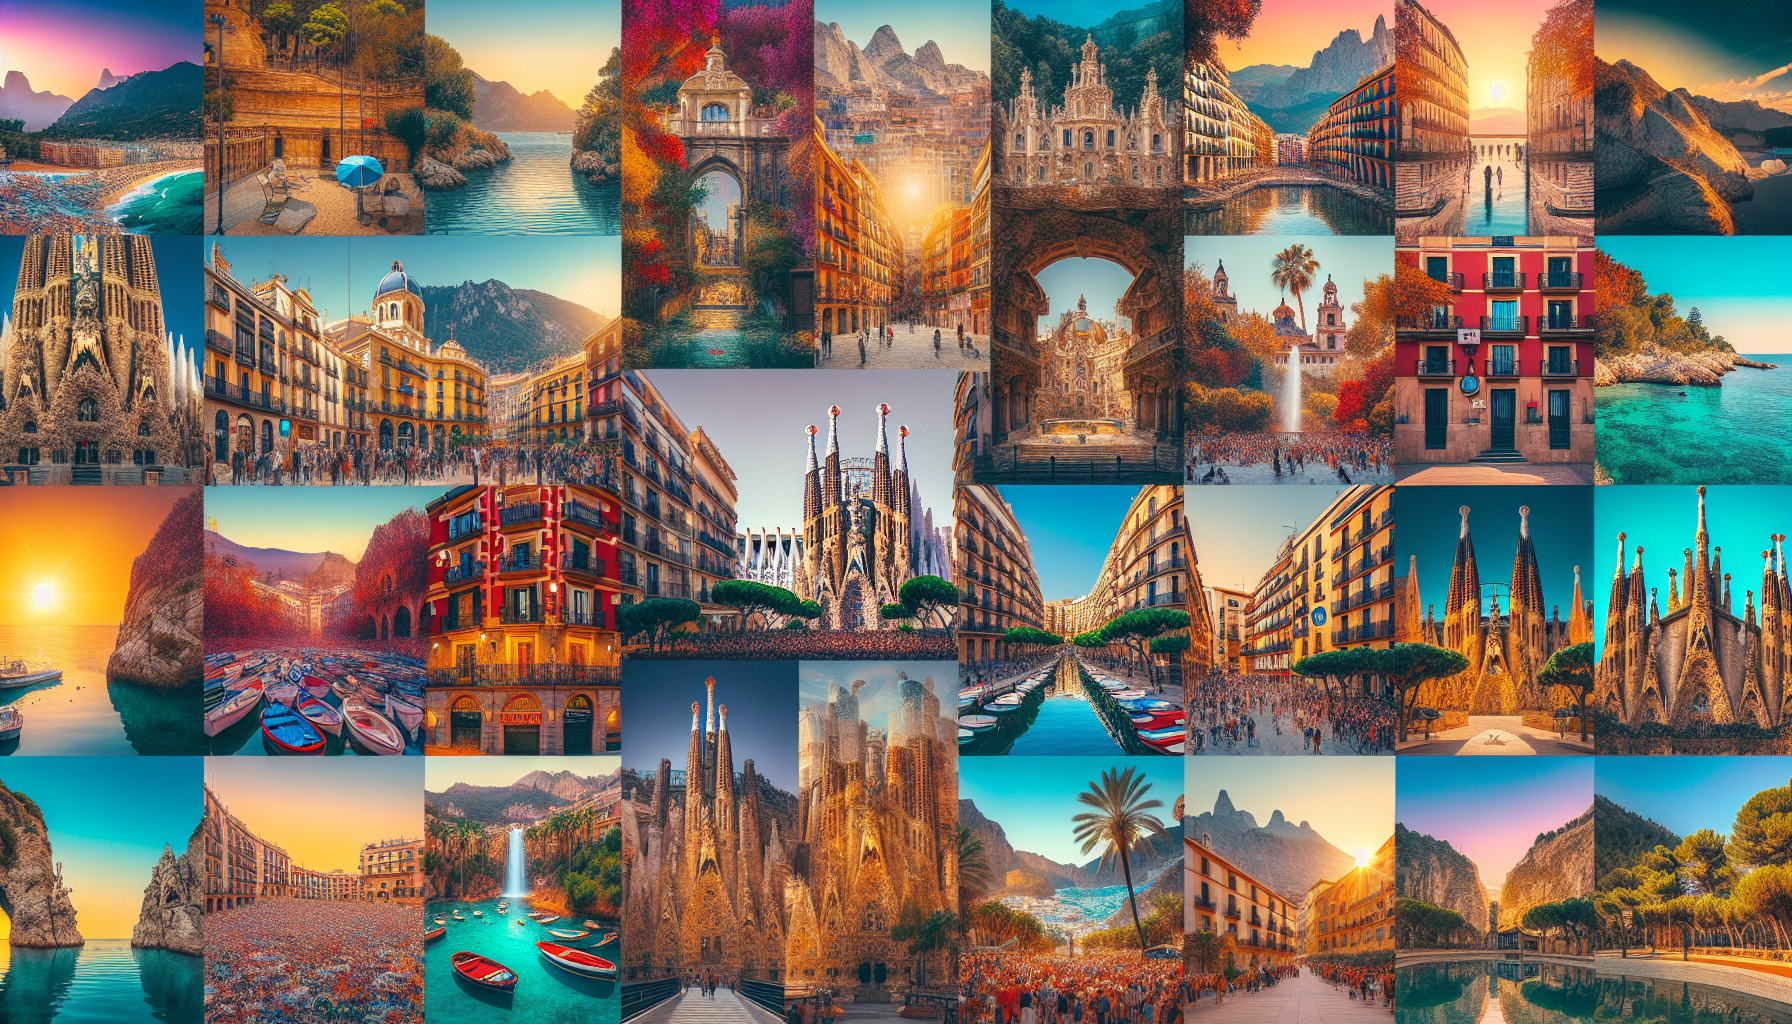 discover the must-see destinations in spain with our guide to the best places to visit in europe. explore the top attractions and experience the vibrant culture of spain's iconic cities and beautiful landscapes.